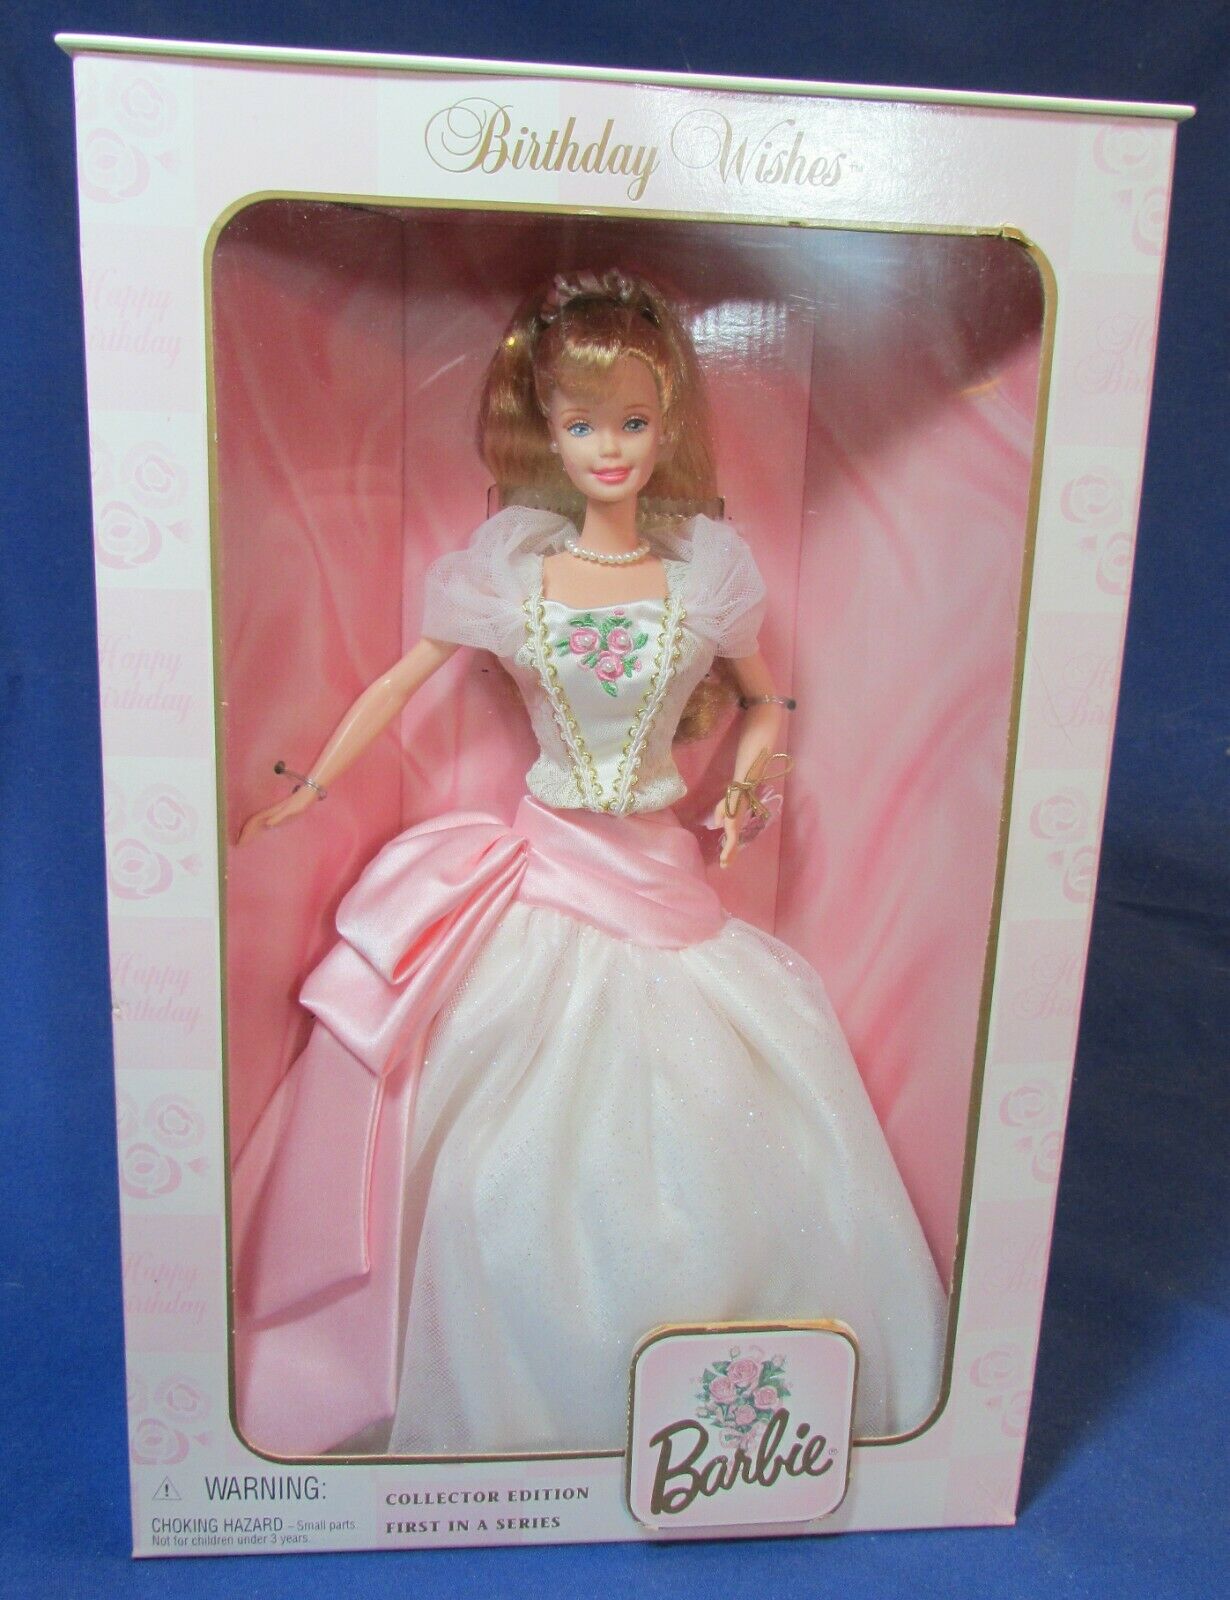 Birthday Wishes Barbie Doll 1999 – Nrfb – Collector Edit – 1st In Series  Never